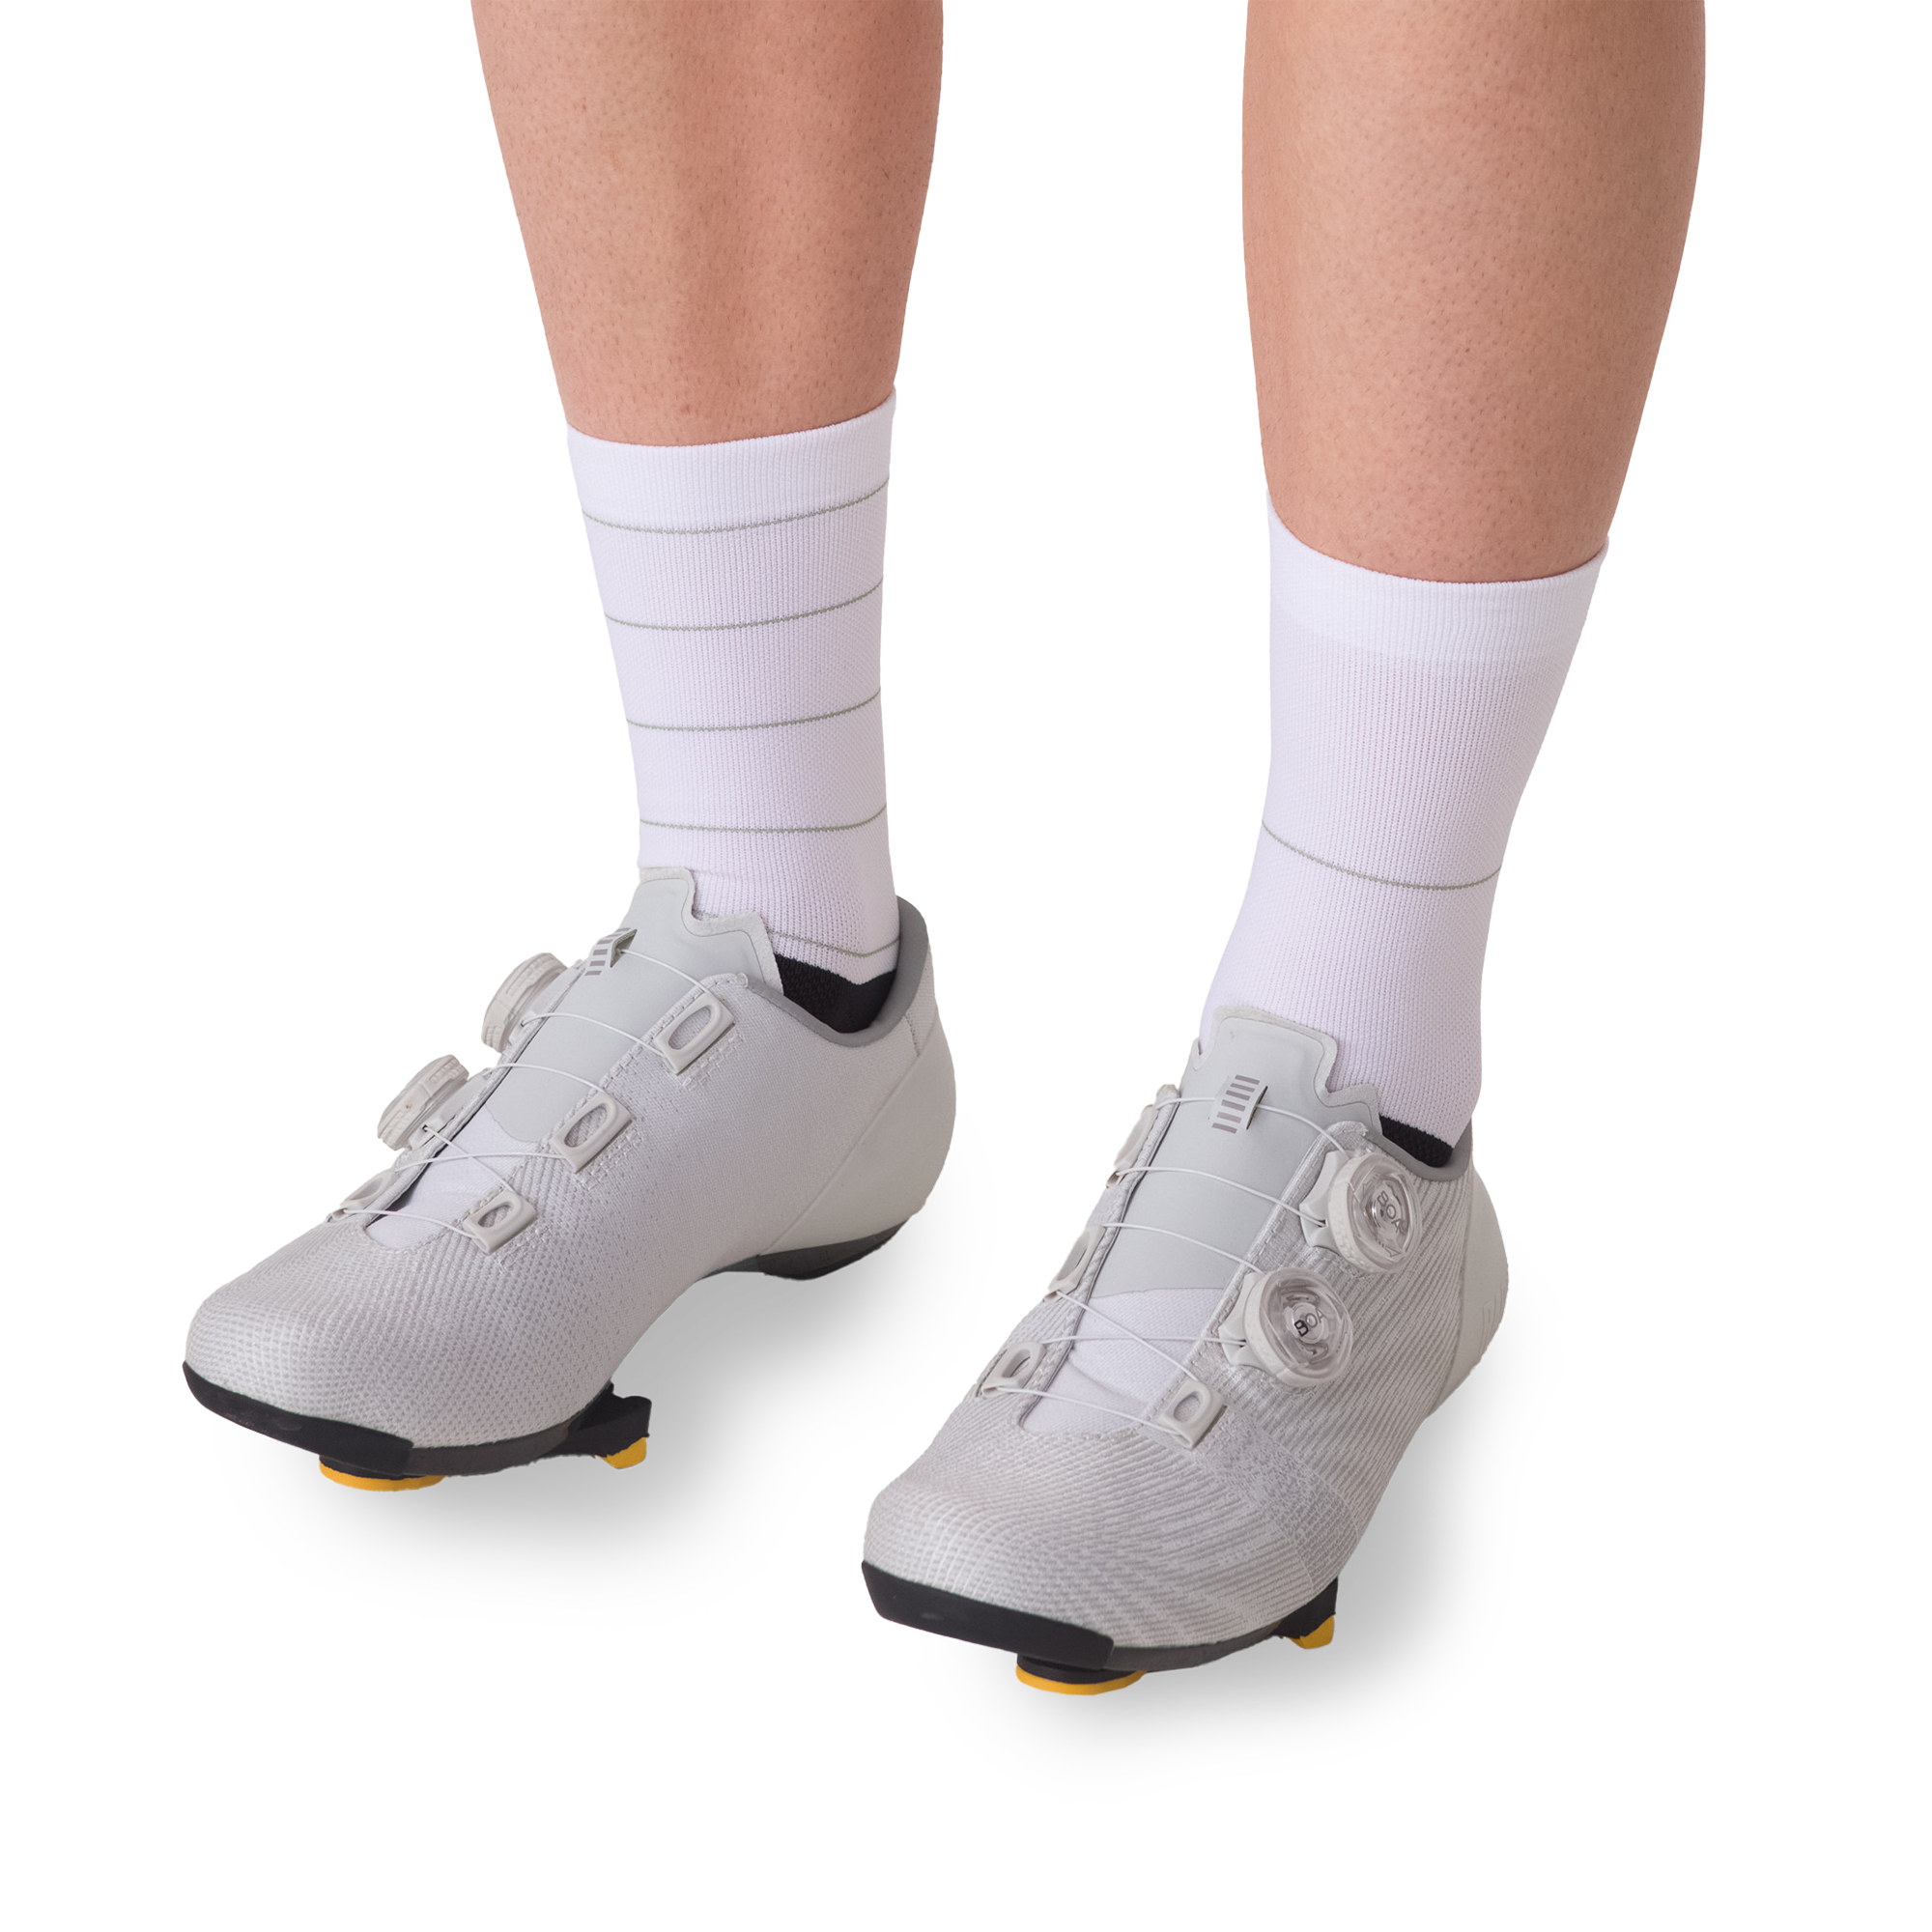 https://opencycle.com/media/4a/e6/53/1698667312/OPEN_Clothing_0006s_0002_Rapha_Socks_3.png